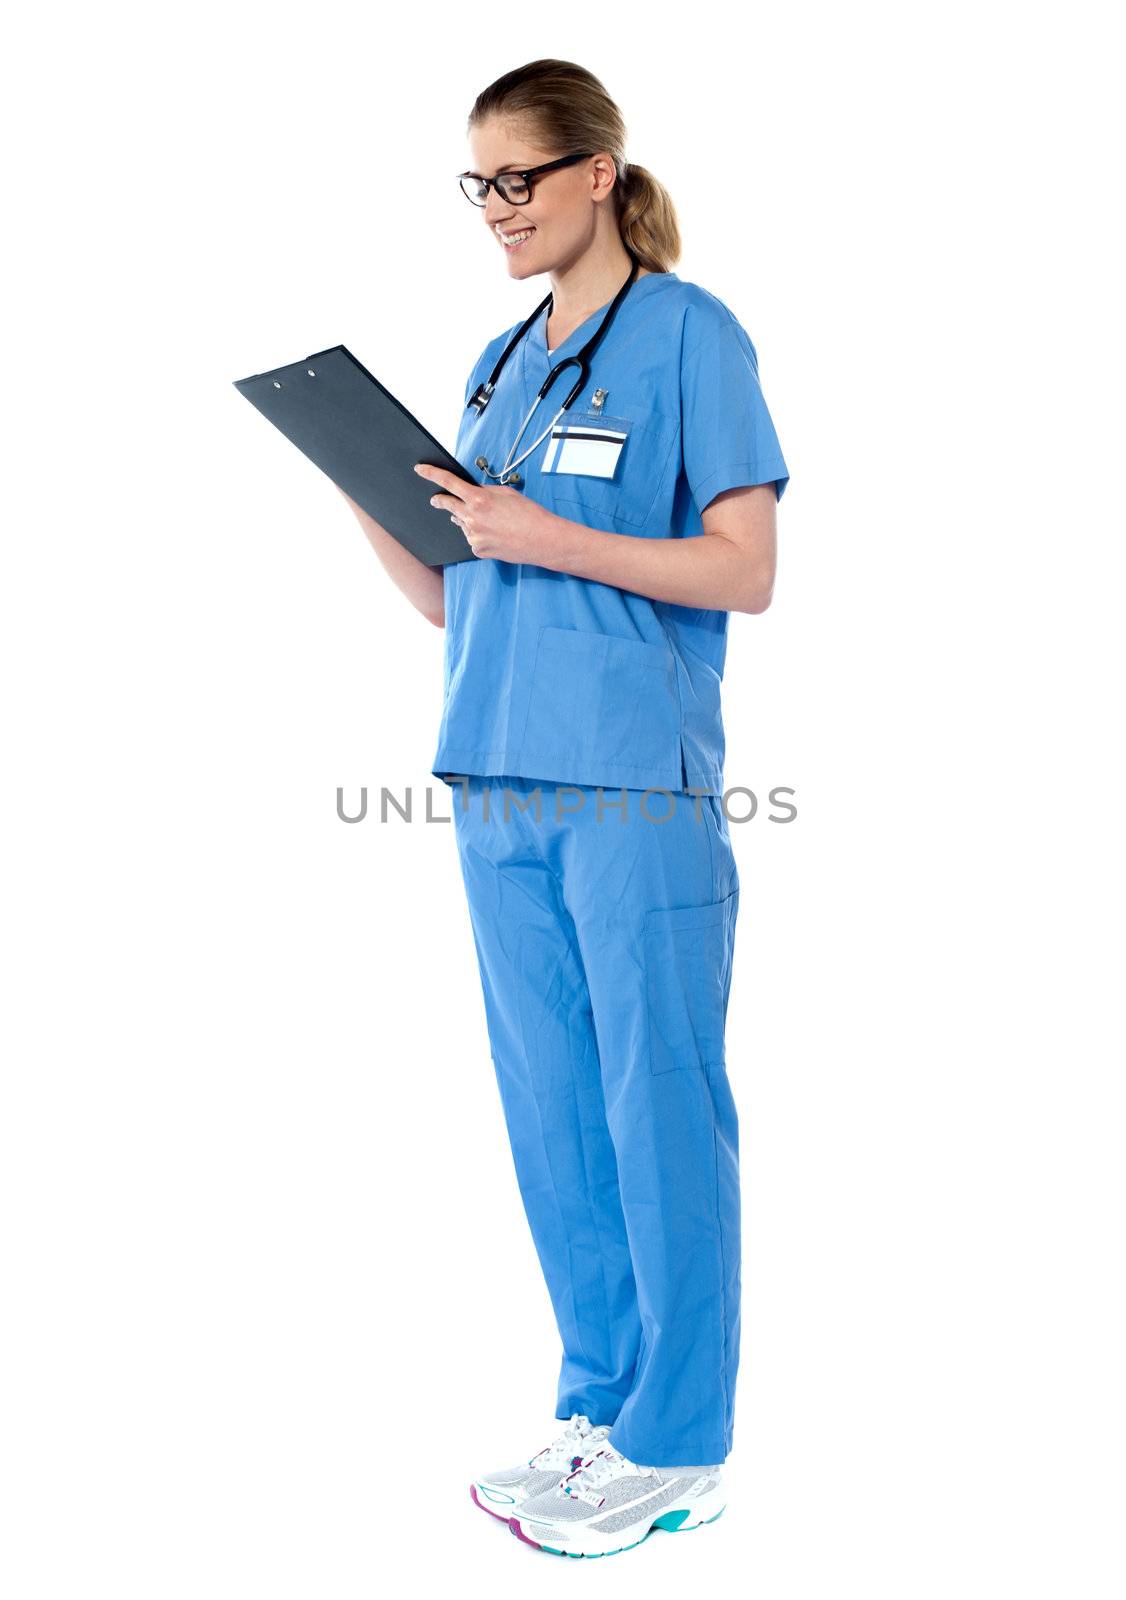 Female surgeon looking at reports isolated on white background